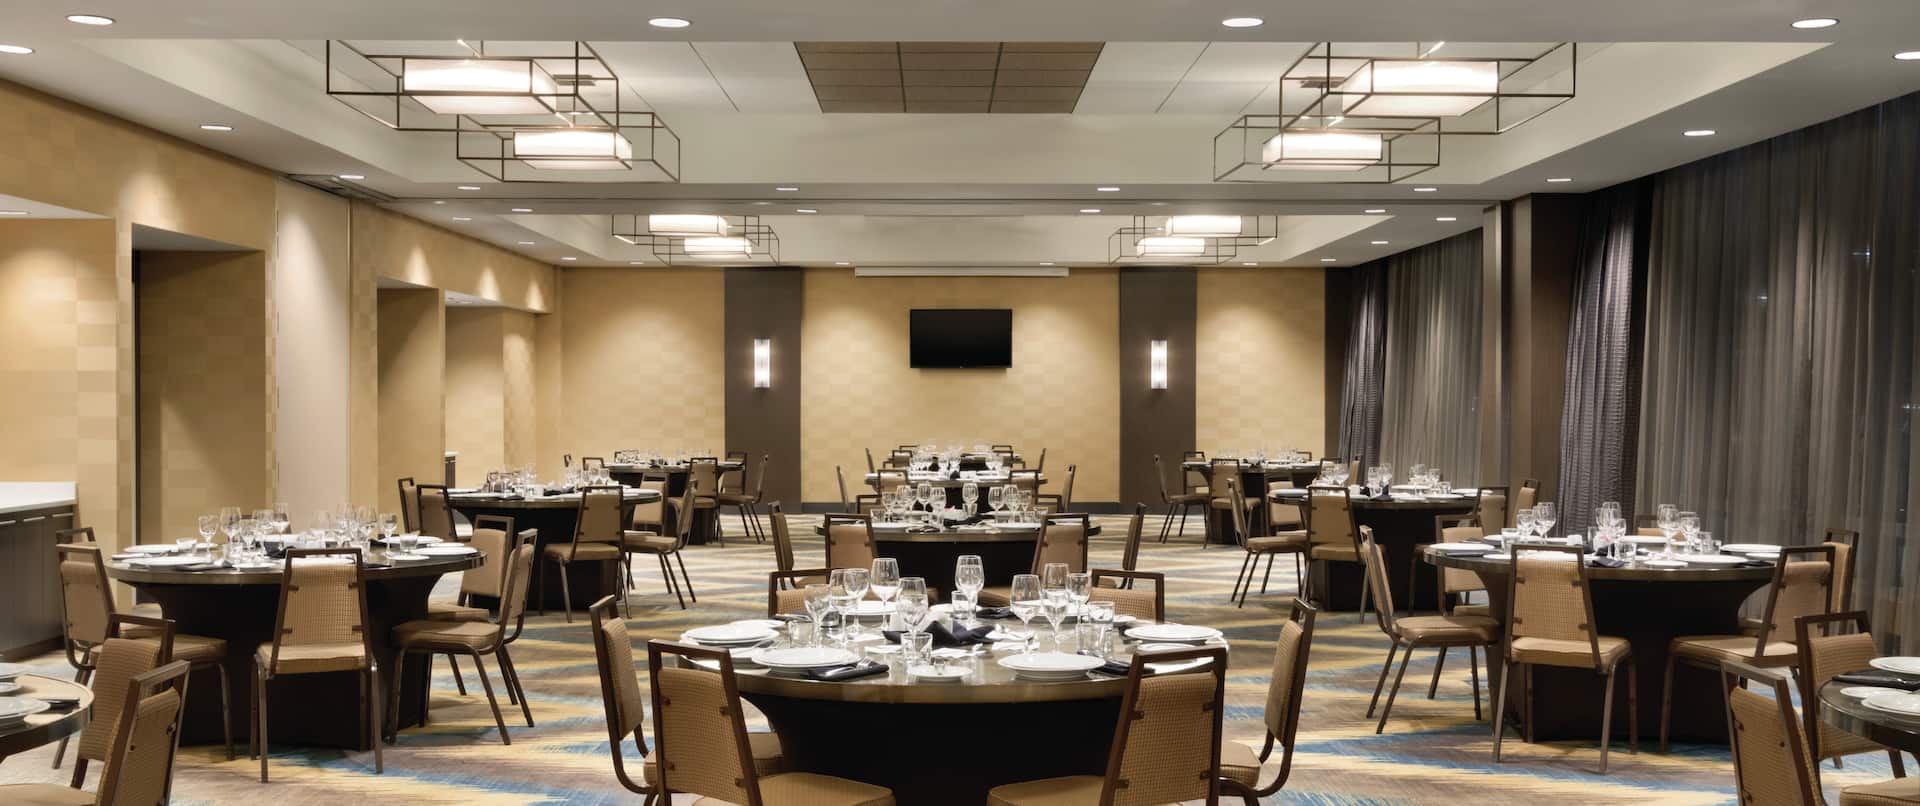 Ballroom Banquet Style Seating with Round Tables and Chairs